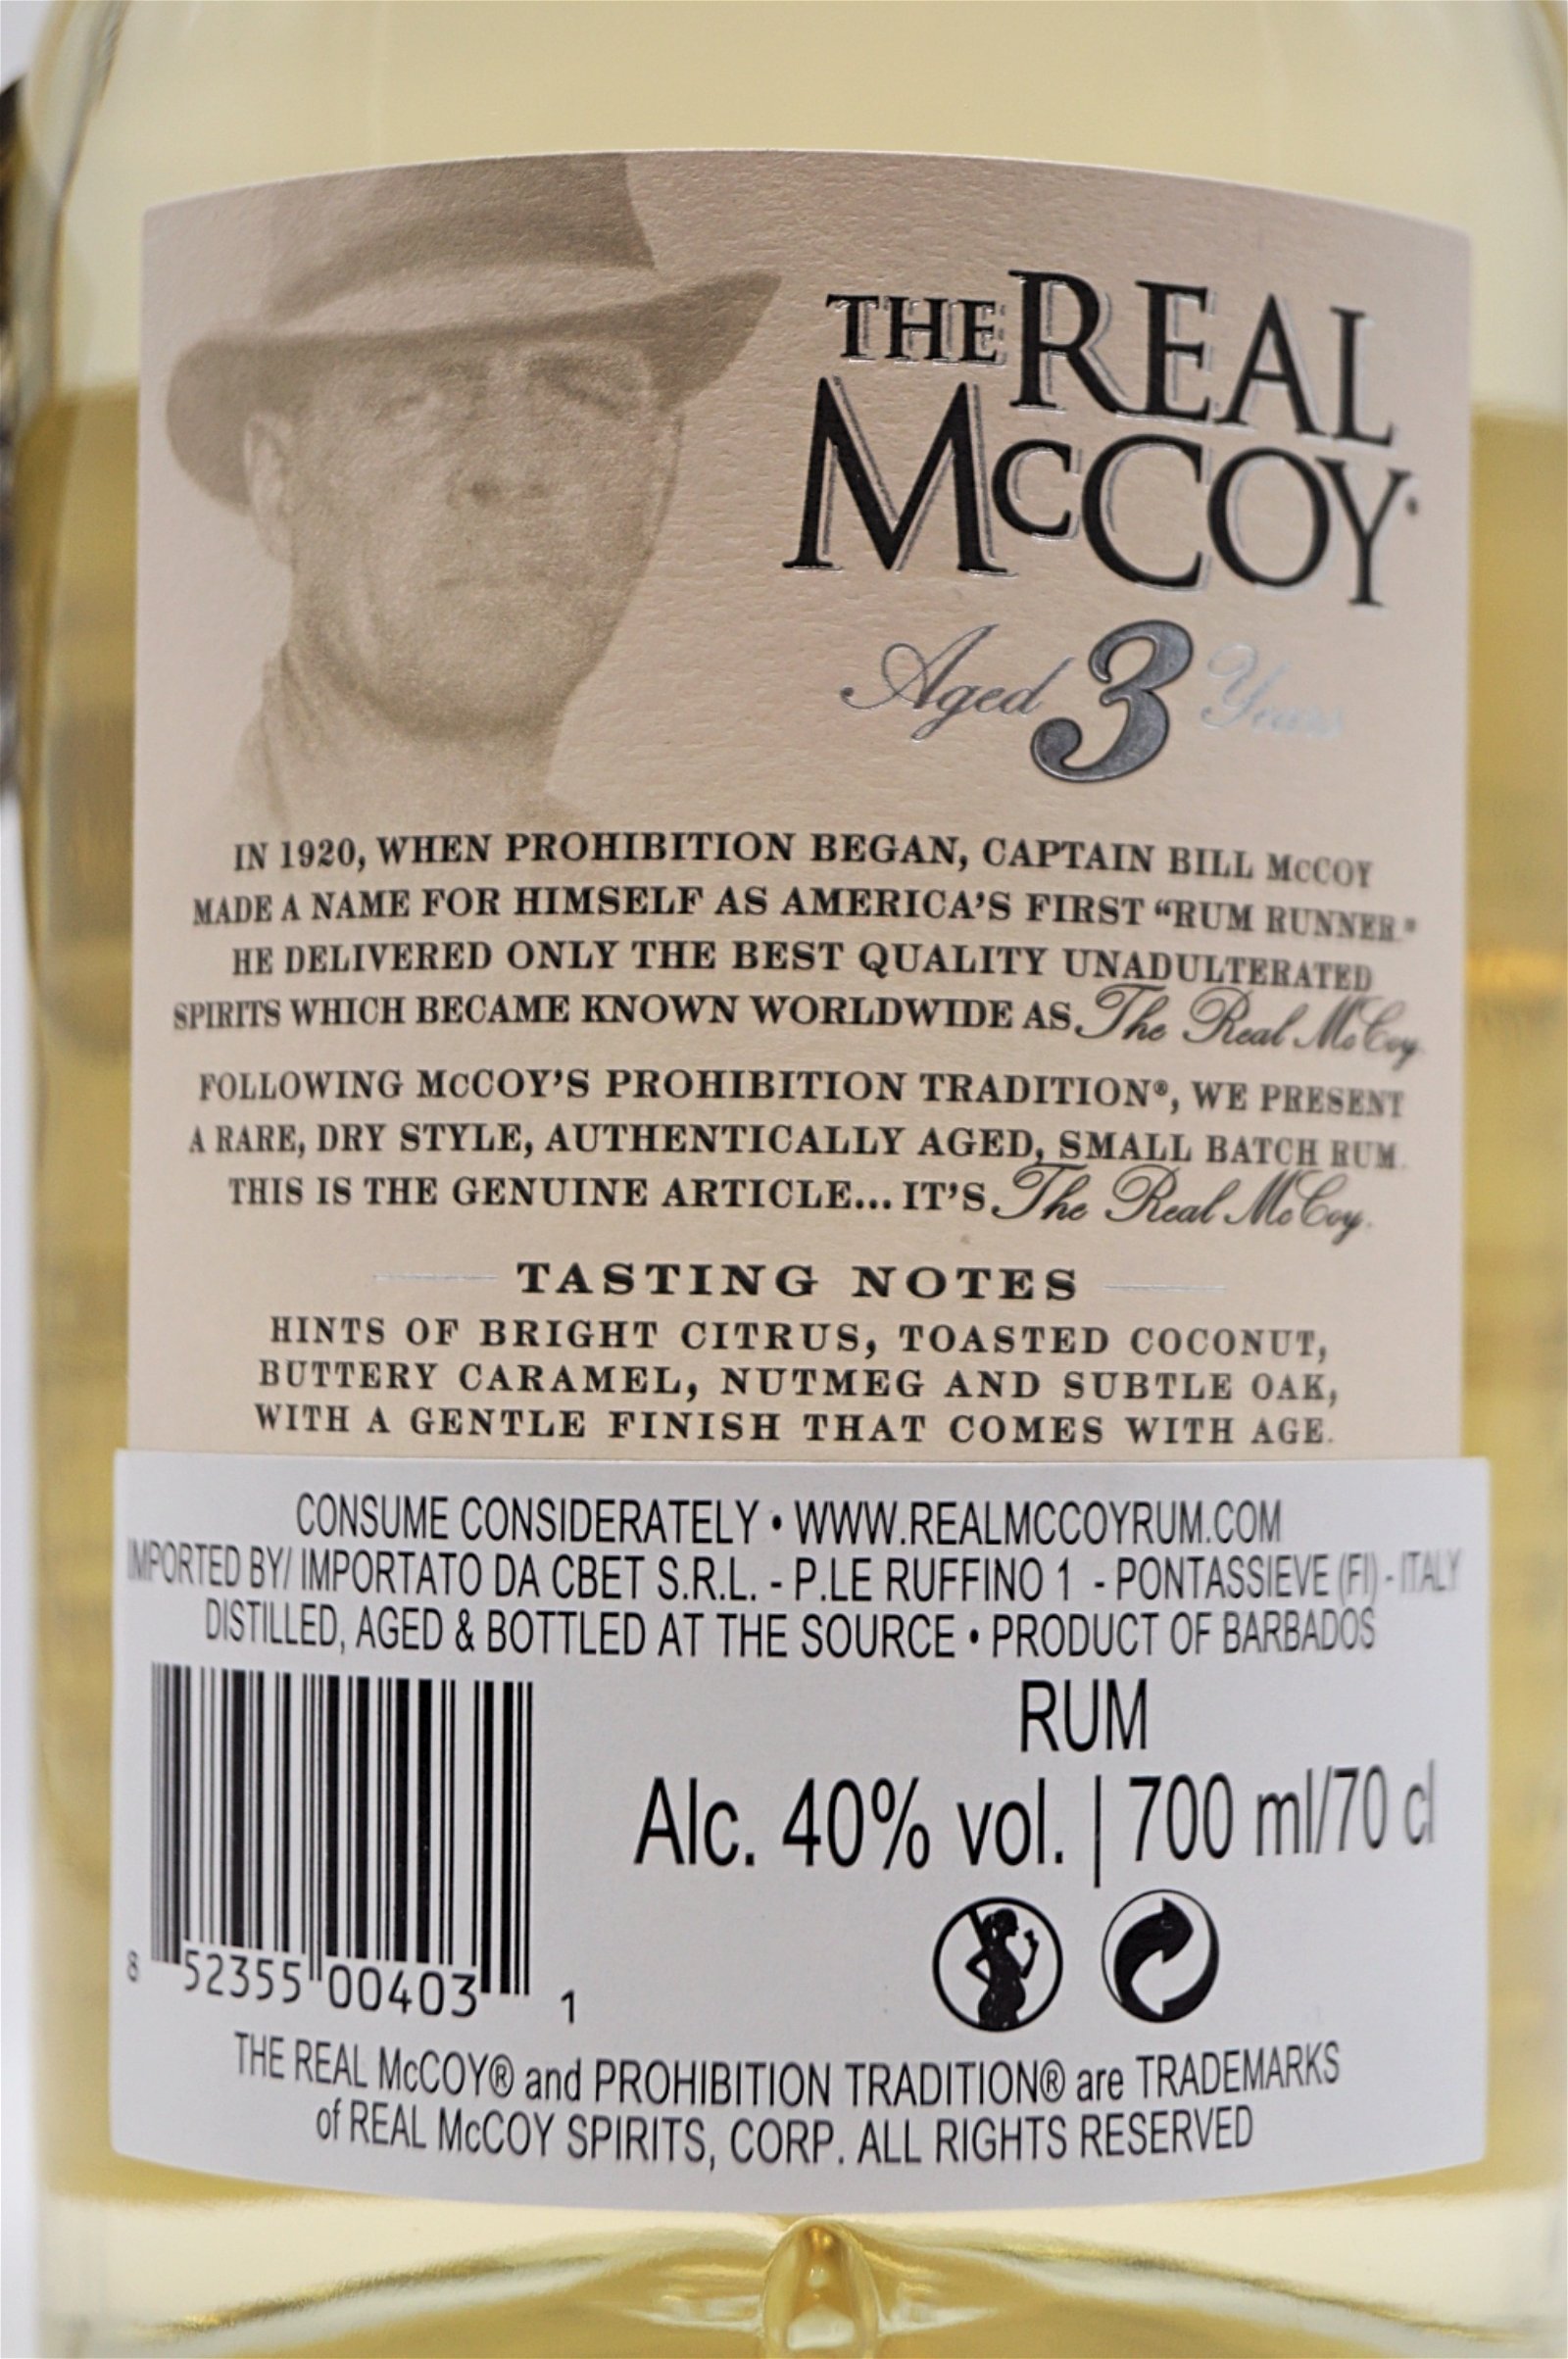 The Real Mc Coy 3 Jahre Single Blended Rum 40%